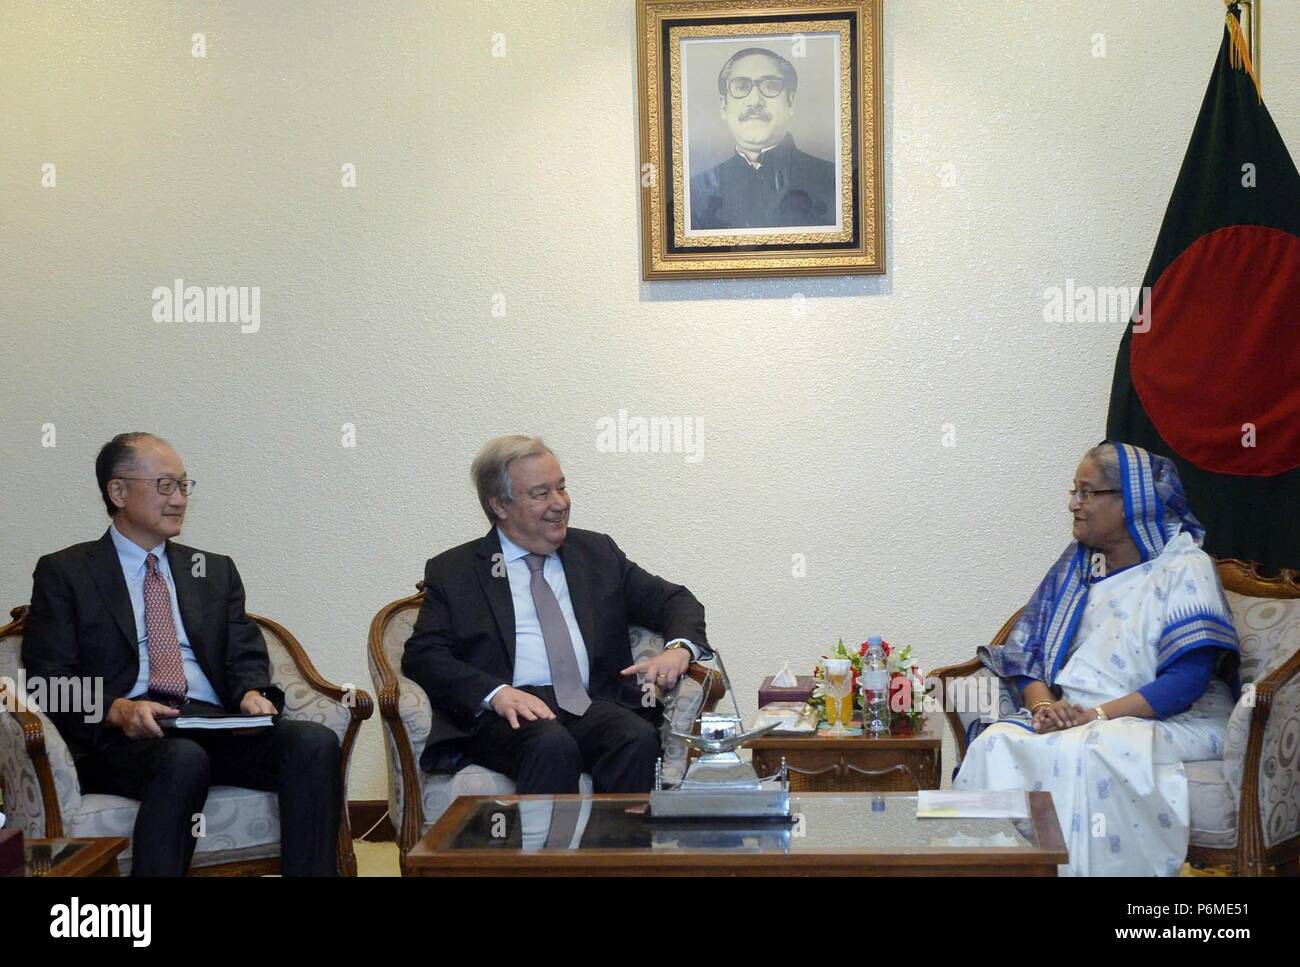 Dhaka. 1st July, 2018. Bangladeshi Prime Minister Sheikh Hasina (R) meets with United Nations Secretary-General Antonio Guterres (C) and World Bank President Jim Yong Kim in Dhaka, Bangladesh, on July 1, 2018. U.N. Secretary-General Antonio Guterres arrived here early Sunday in a joint visit with World Bank President Jim Yong Kim to assess the needs for the nearly one million Rohingya refugees driven from their homes in Myanmar. Credit: Xinhua/Alamy Live News Stock Photo